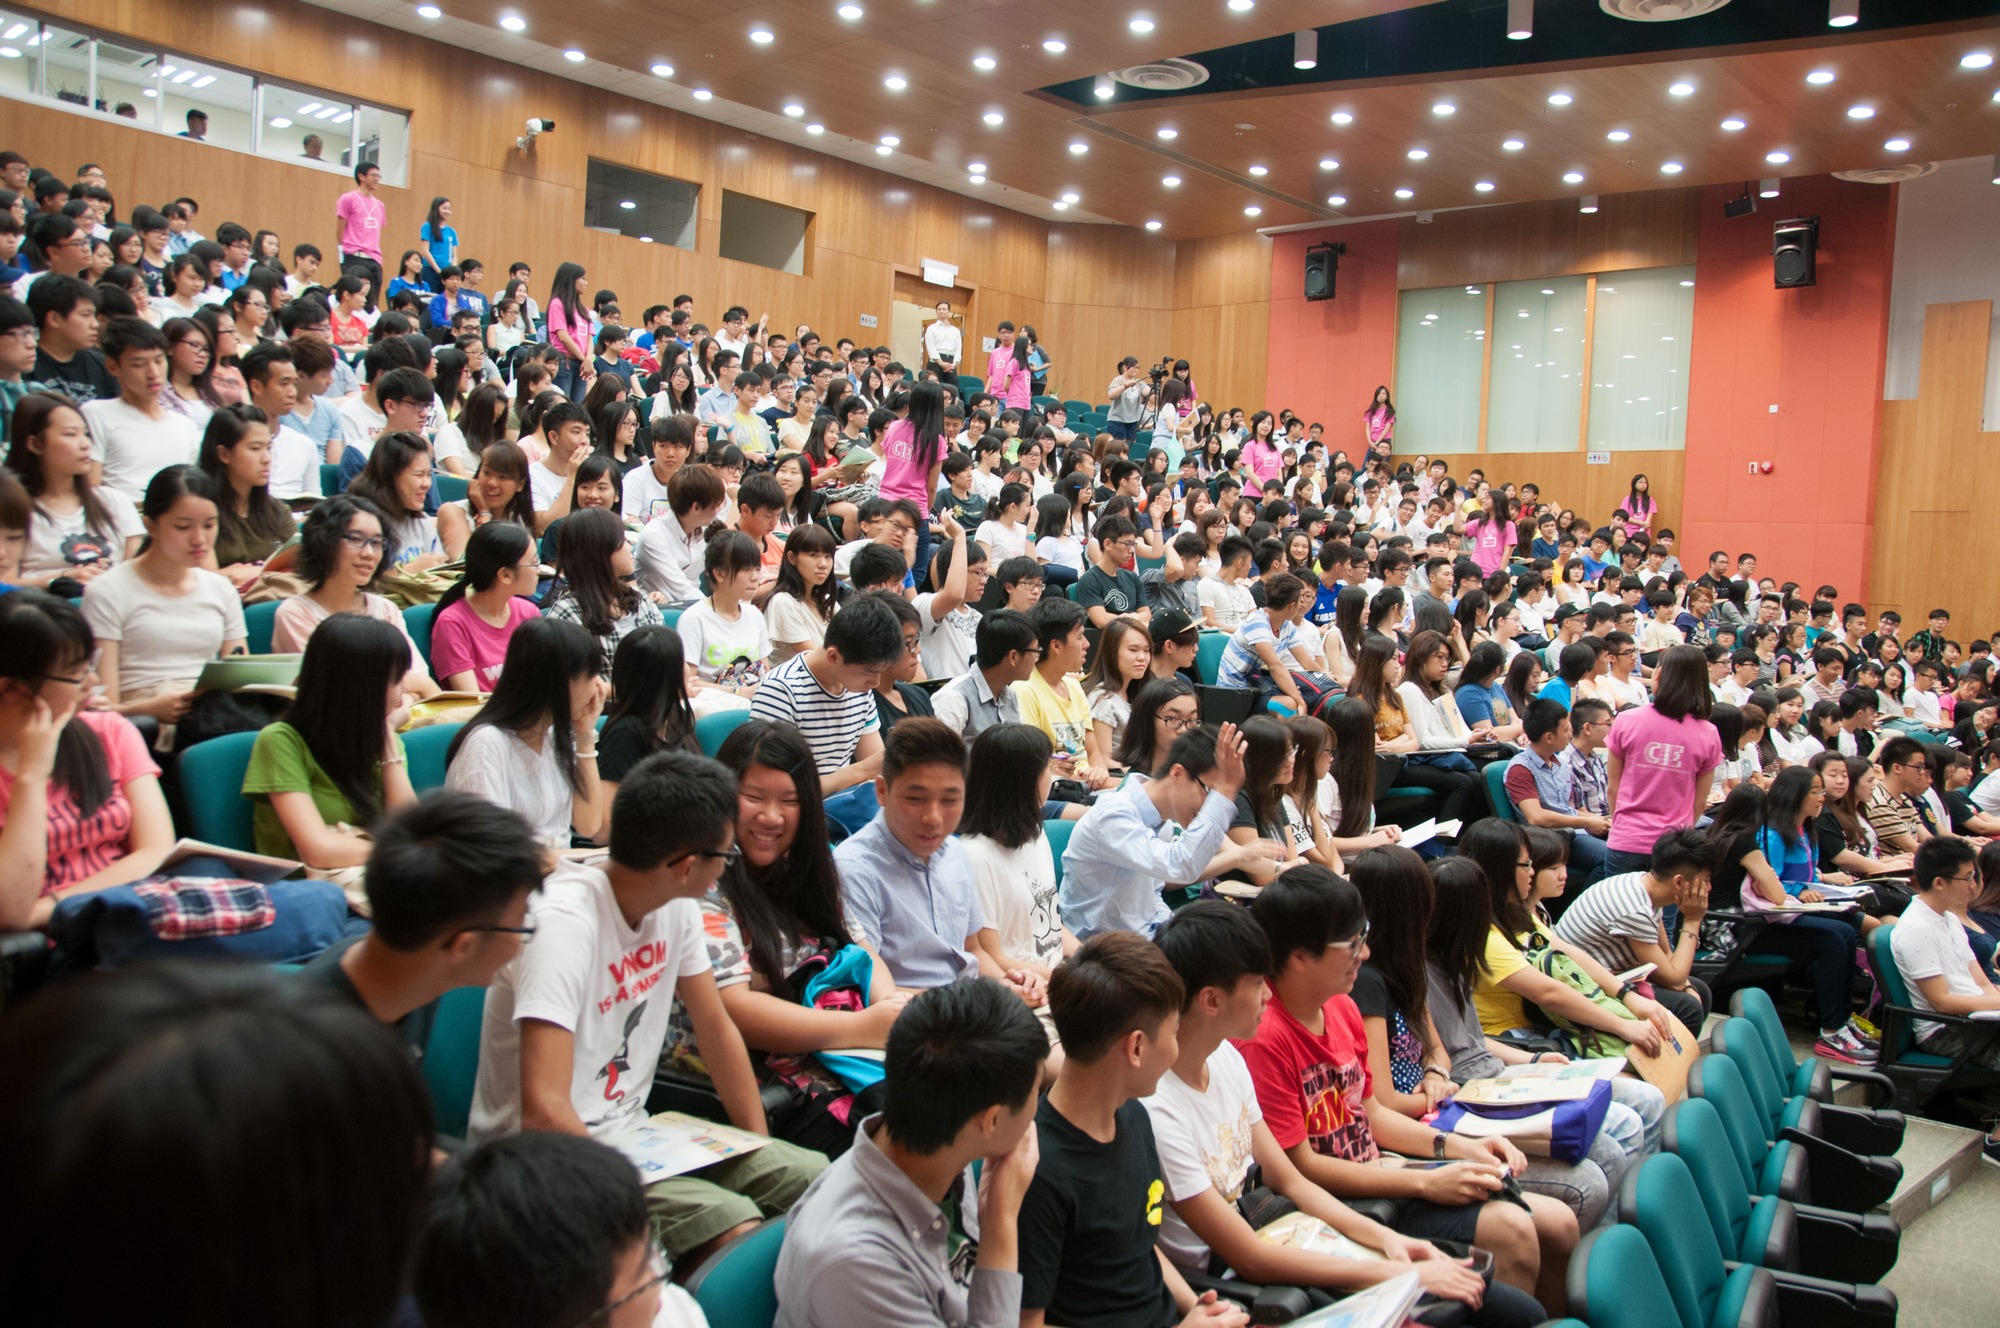 About 2,500 new students from the Associate Degree and Undergraduate Programmes joined the NSO week.